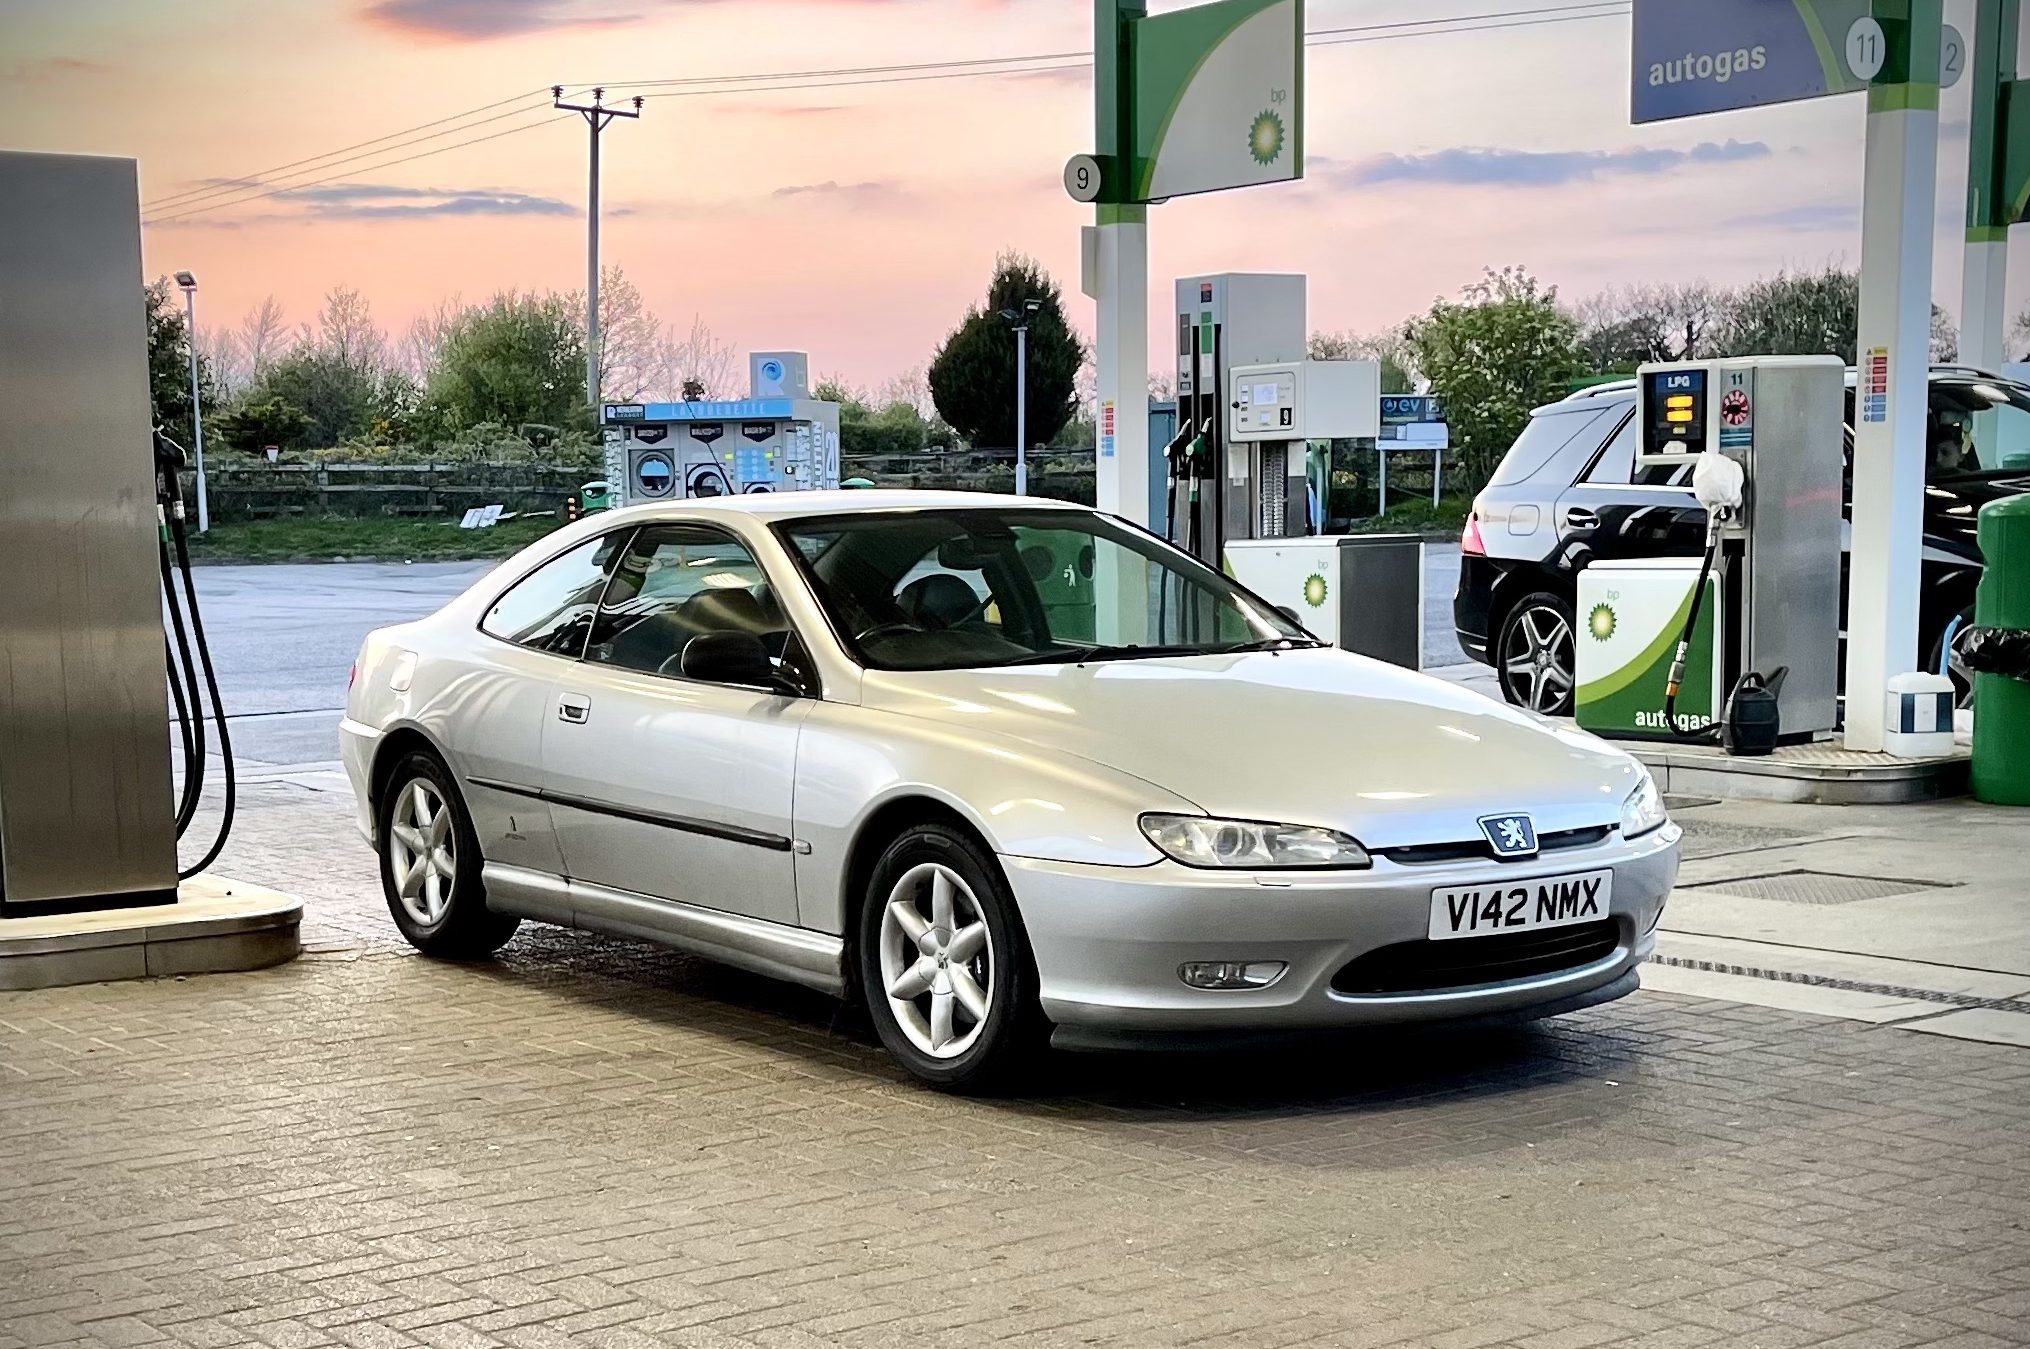 Saving and restoring a Peugeot 406 Coupé pushed me to my limits – but I'm  glad I did